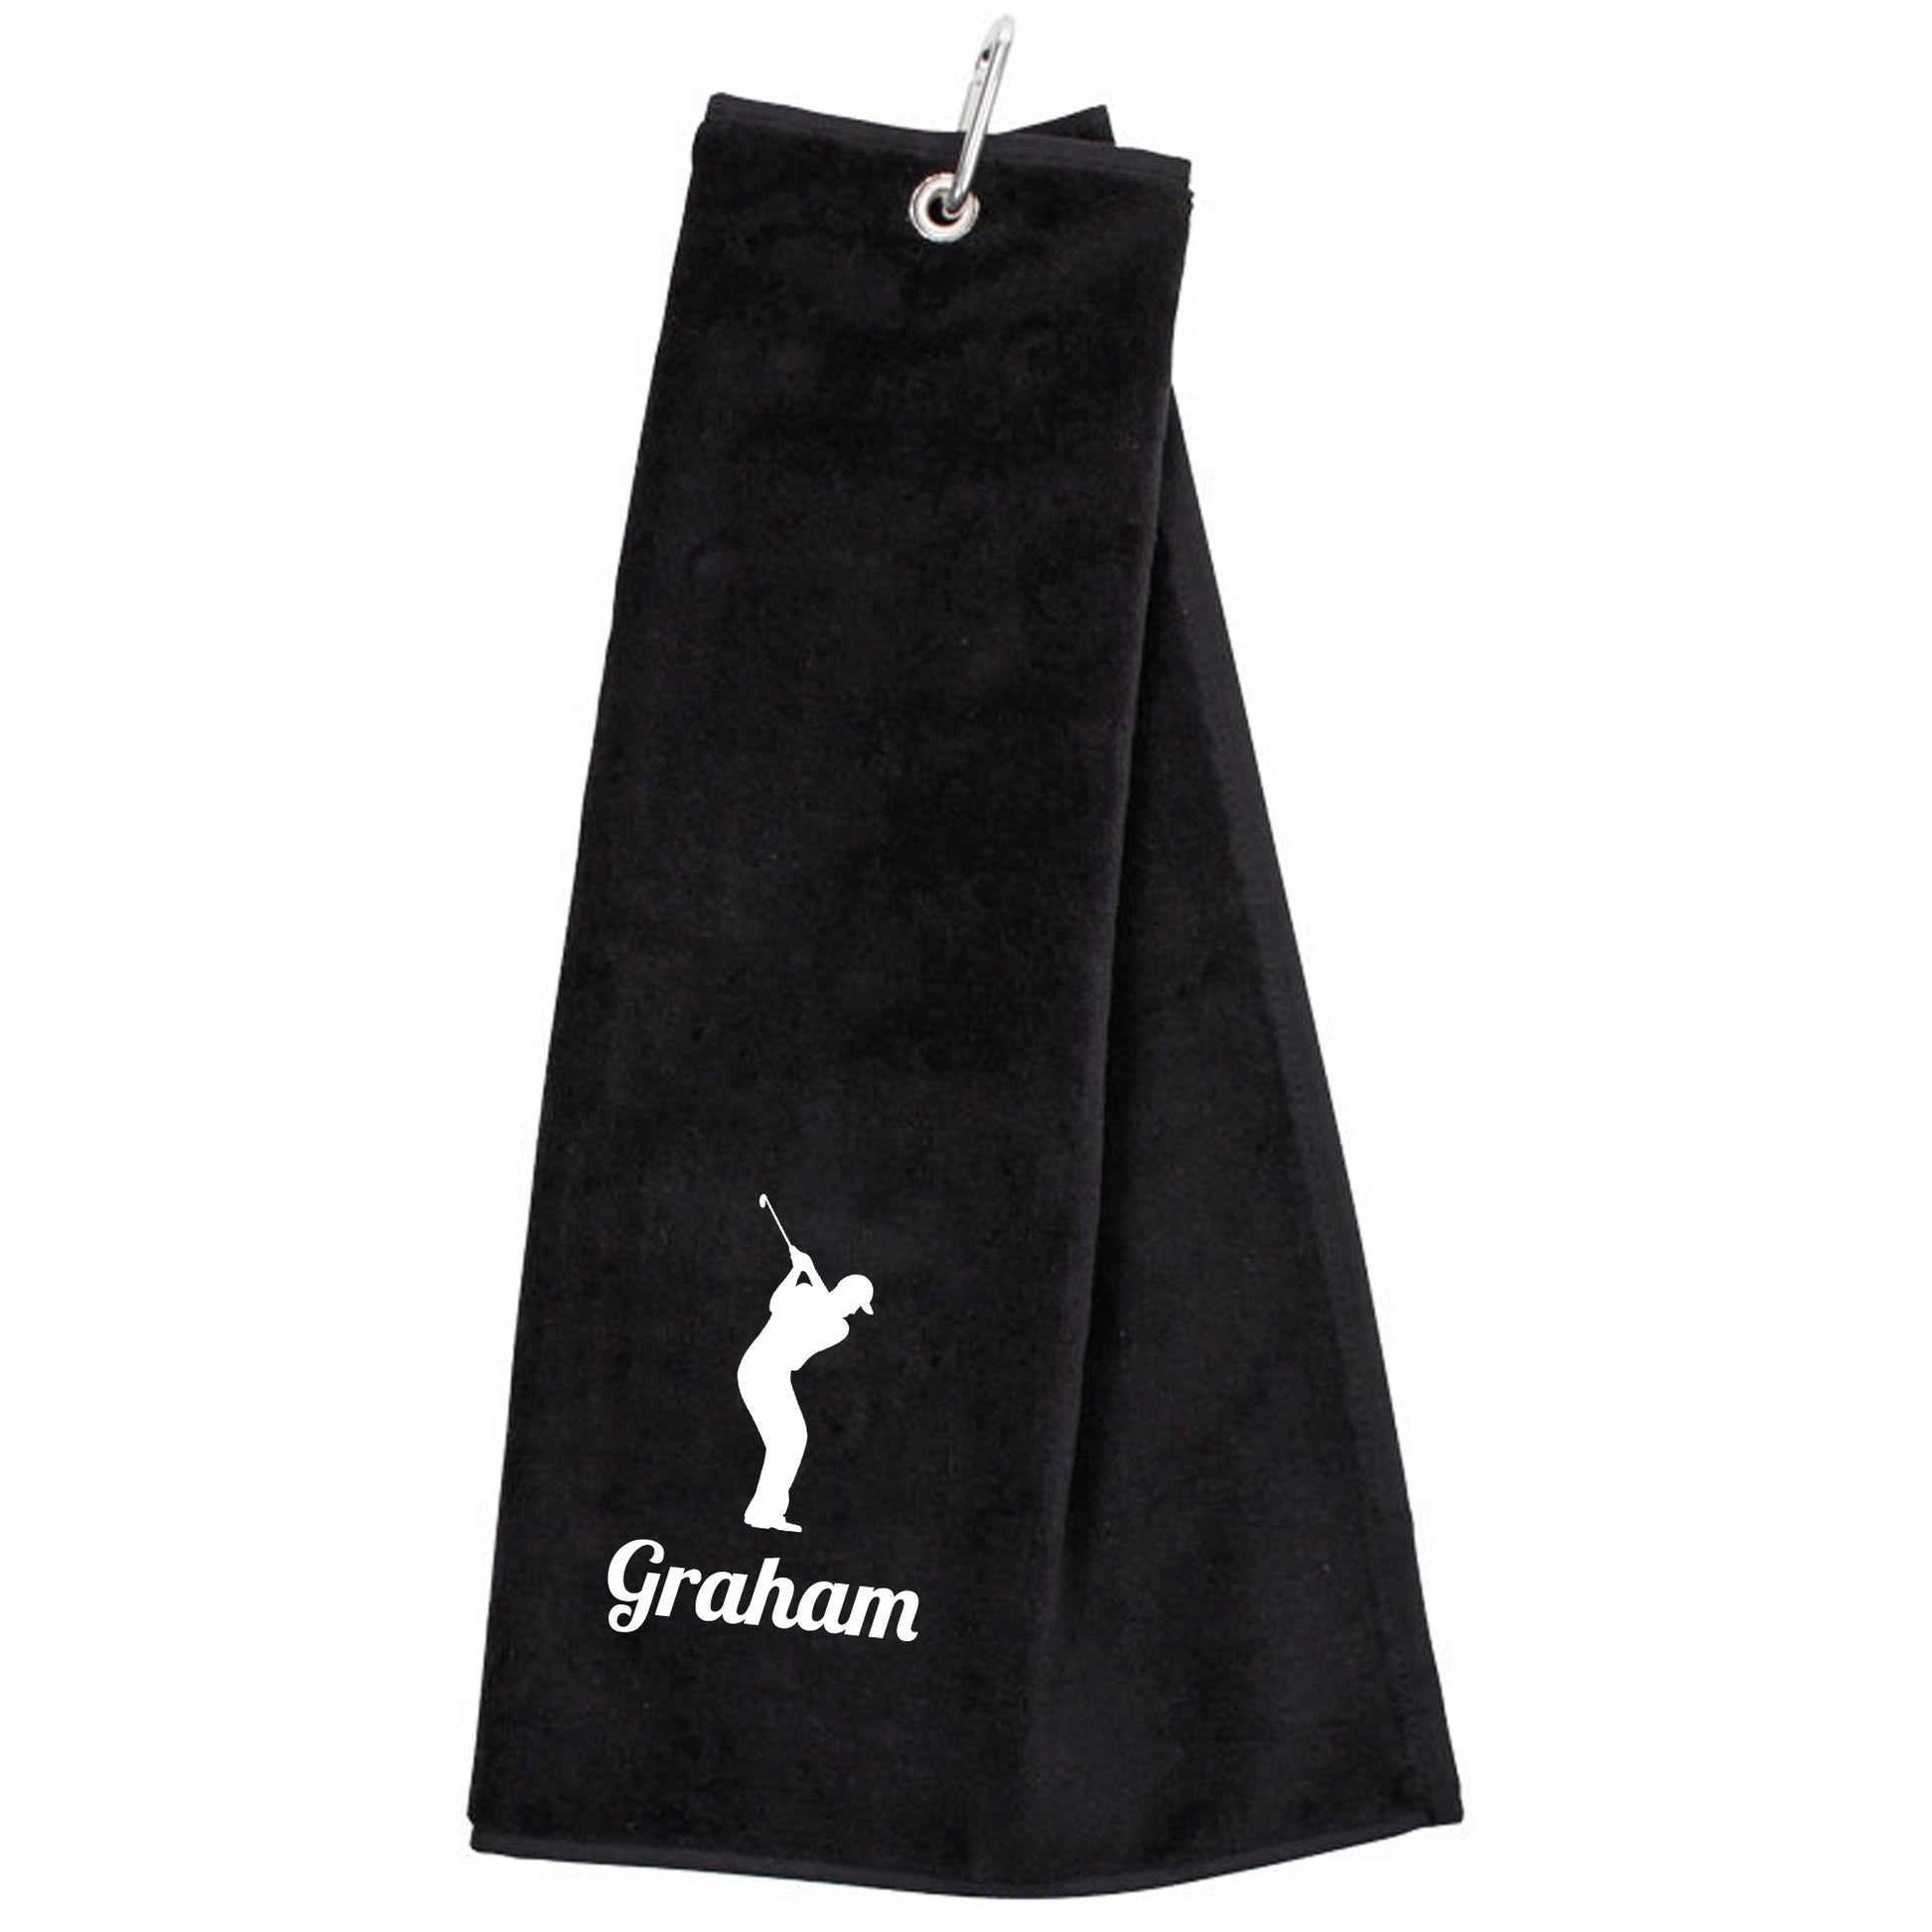 Personalised Embroidered Tri Fold GOLF Towel Trifold Towel with Carabiner Clip  - Always Looking Good - Black  